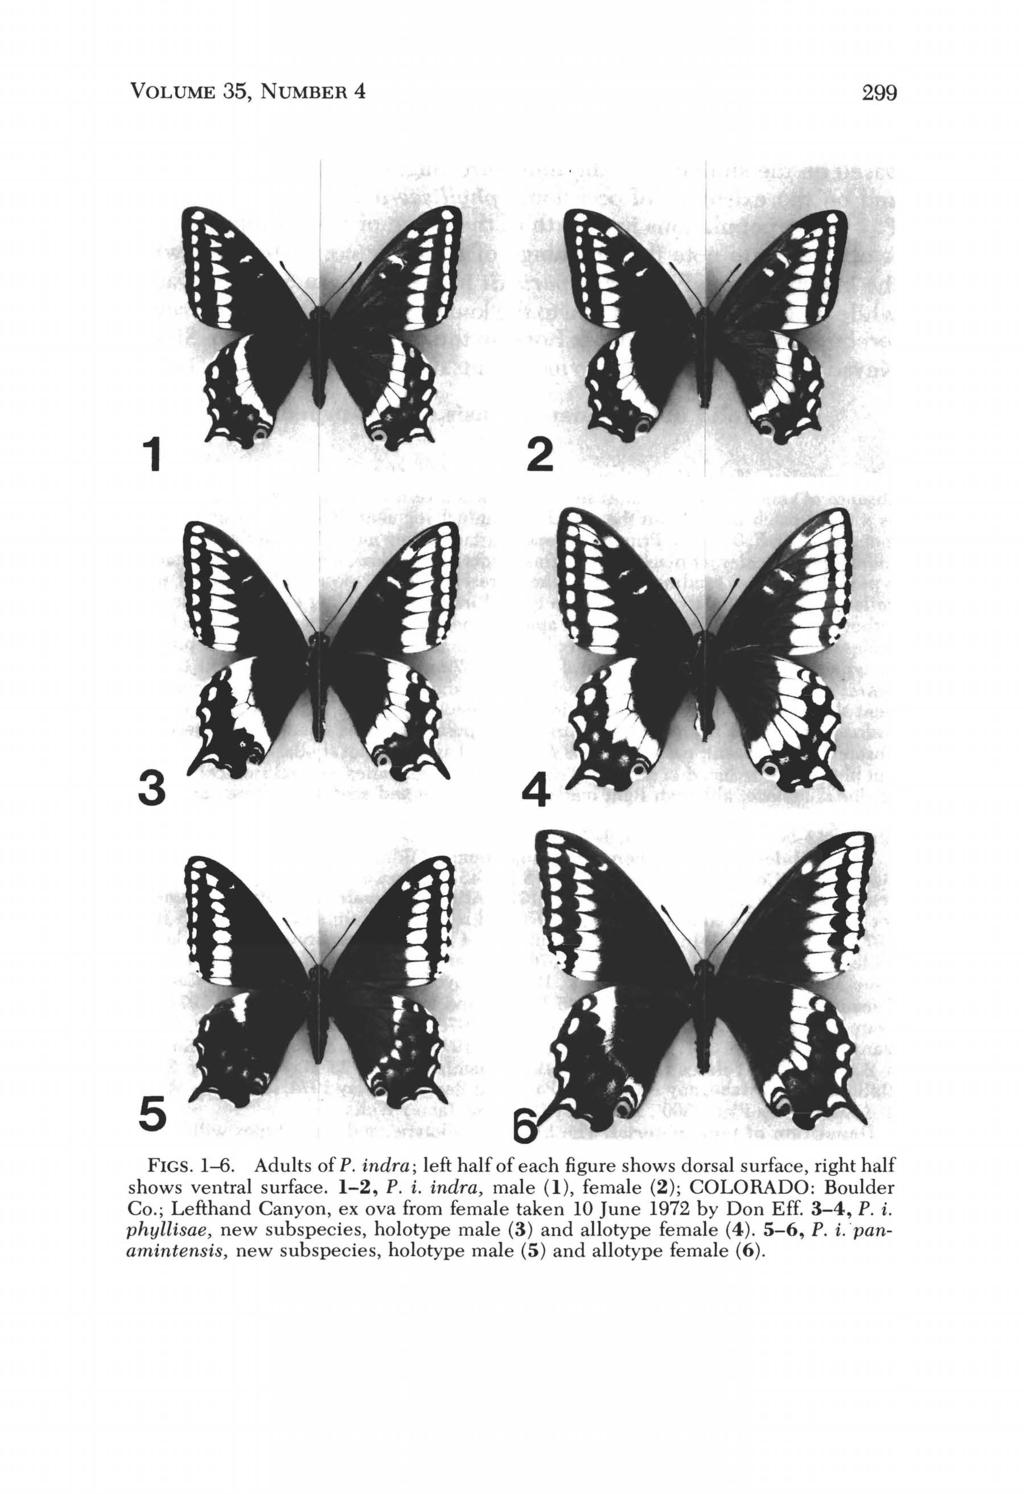 VOLUME 35, NUMBER 4 299 1 3 5 FIGS. 1-6. Adults of P. indra; left half of each figure shows dorsal surface, right half shows ventral surface. 1-2, P. i. indra, male (1), female (2); COLORADO: Boulder Co.